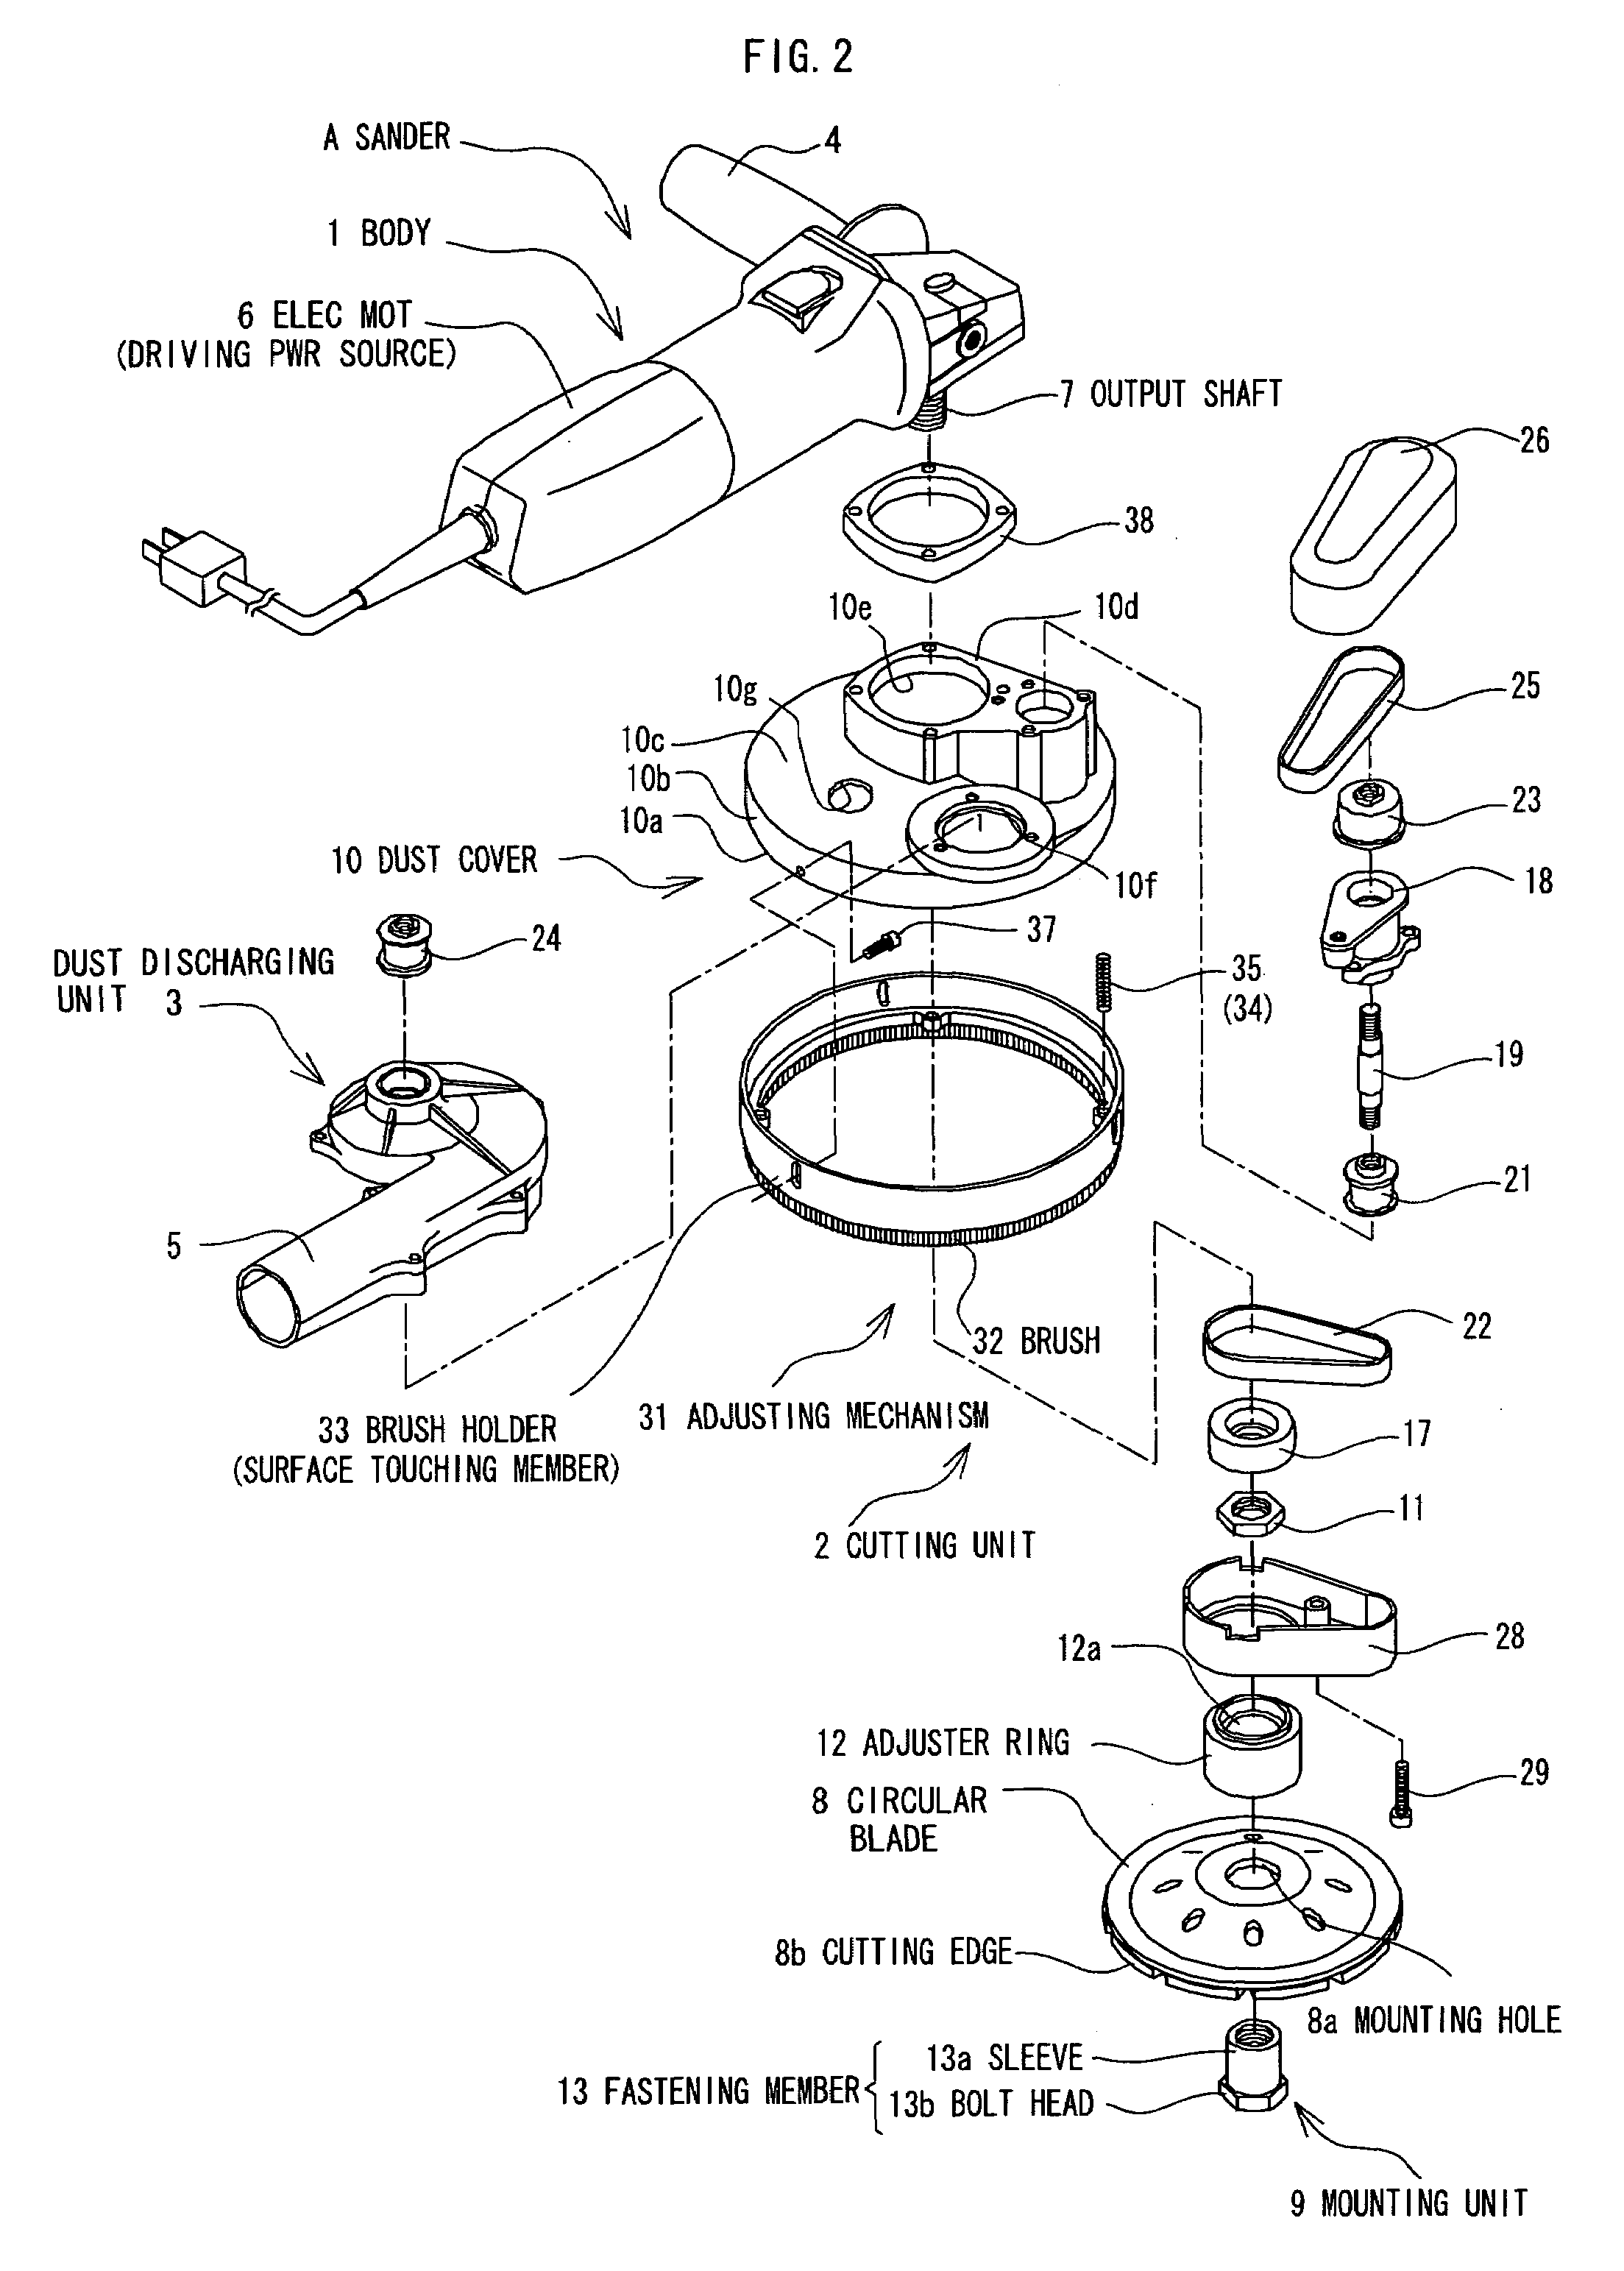 Cutting apparatus with dust discharging